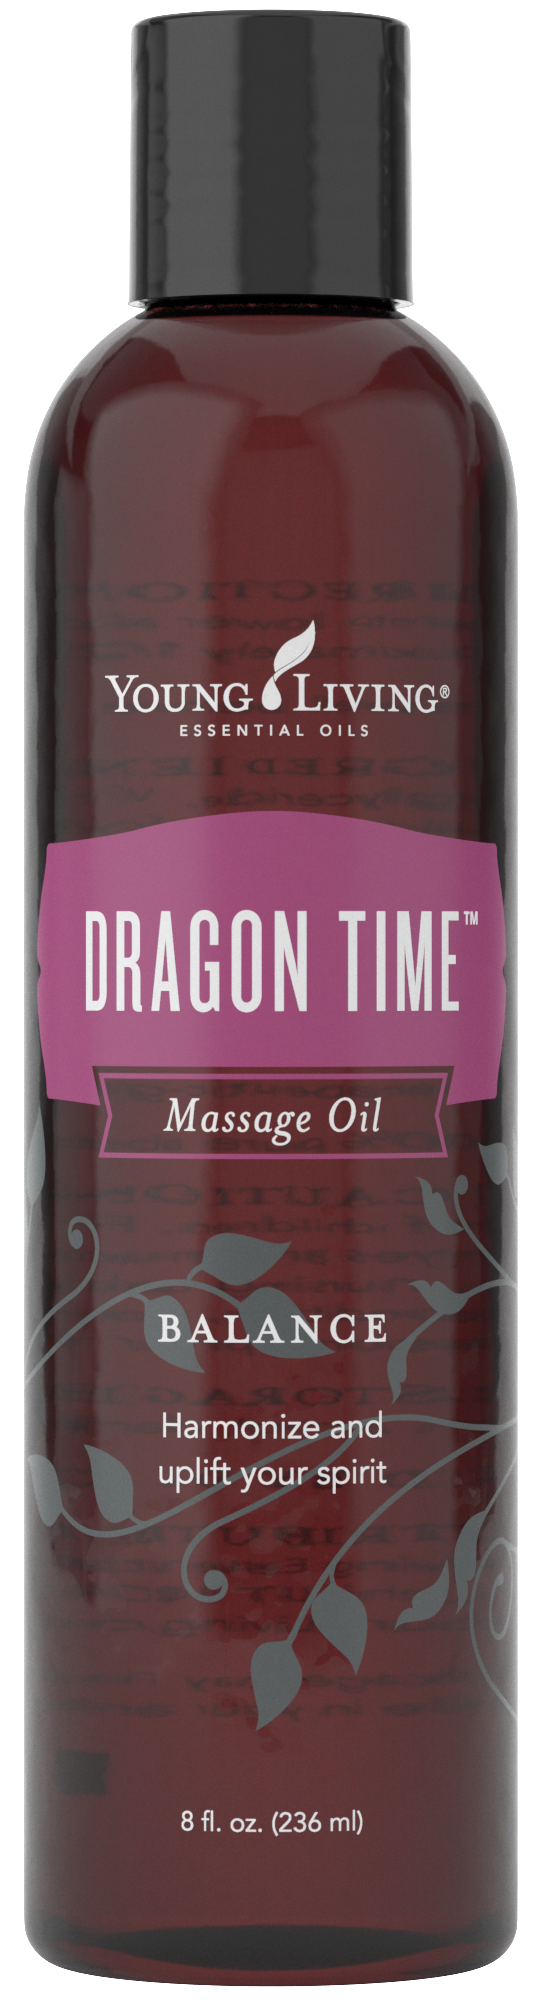 Dragon Time Massage Oil | Young Living essential oils